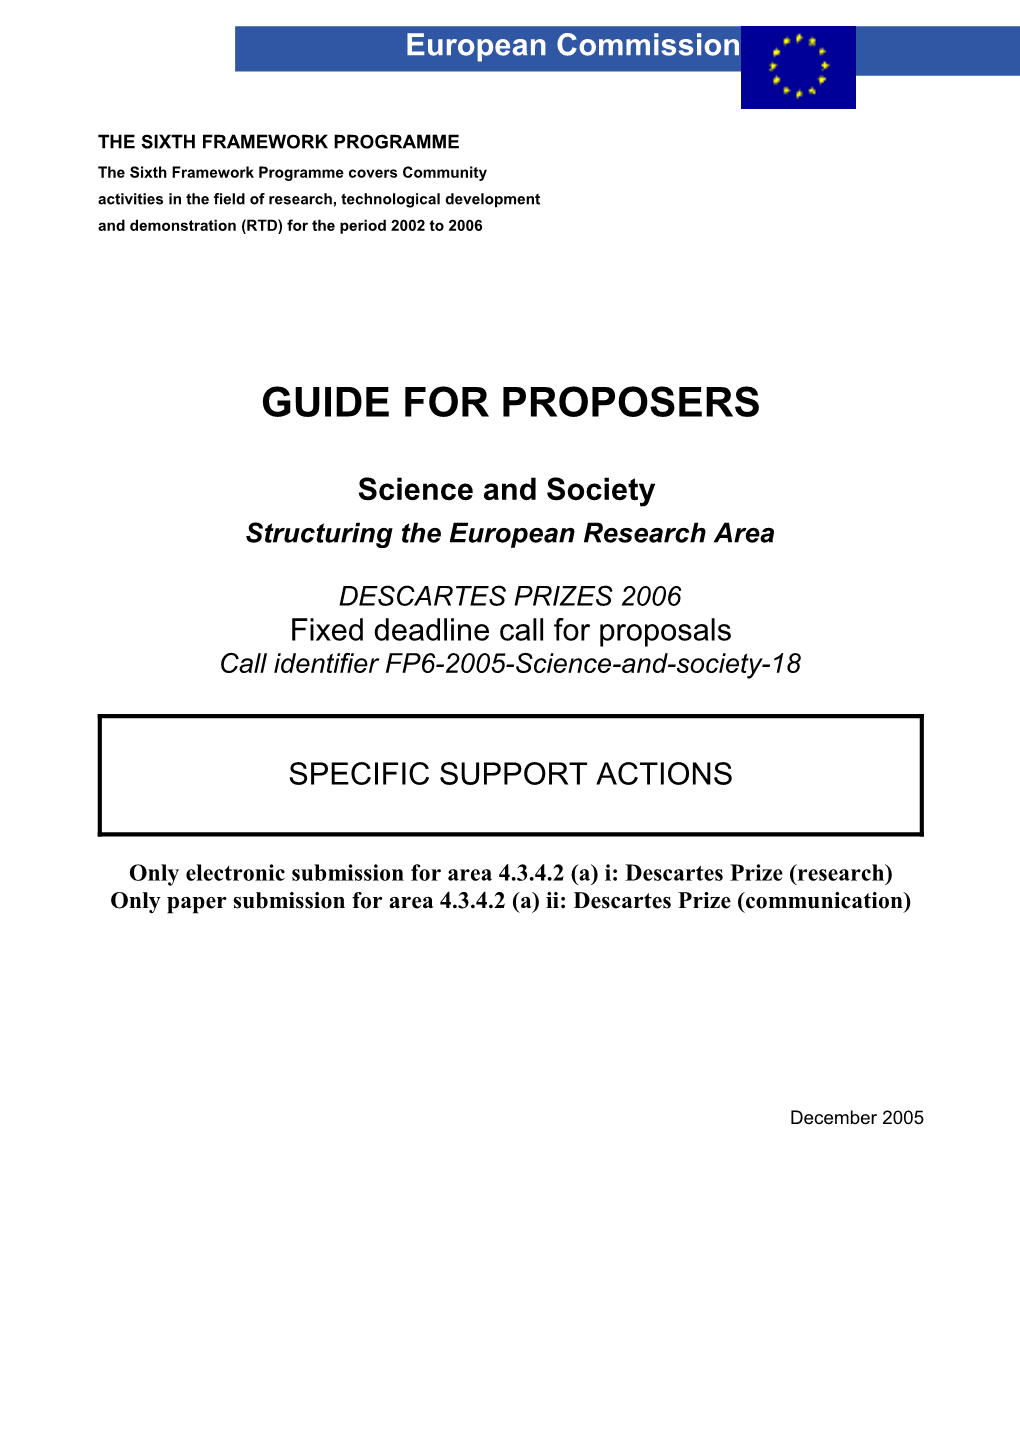 Science and Society - Guide for Proposers for Specific Support Actions